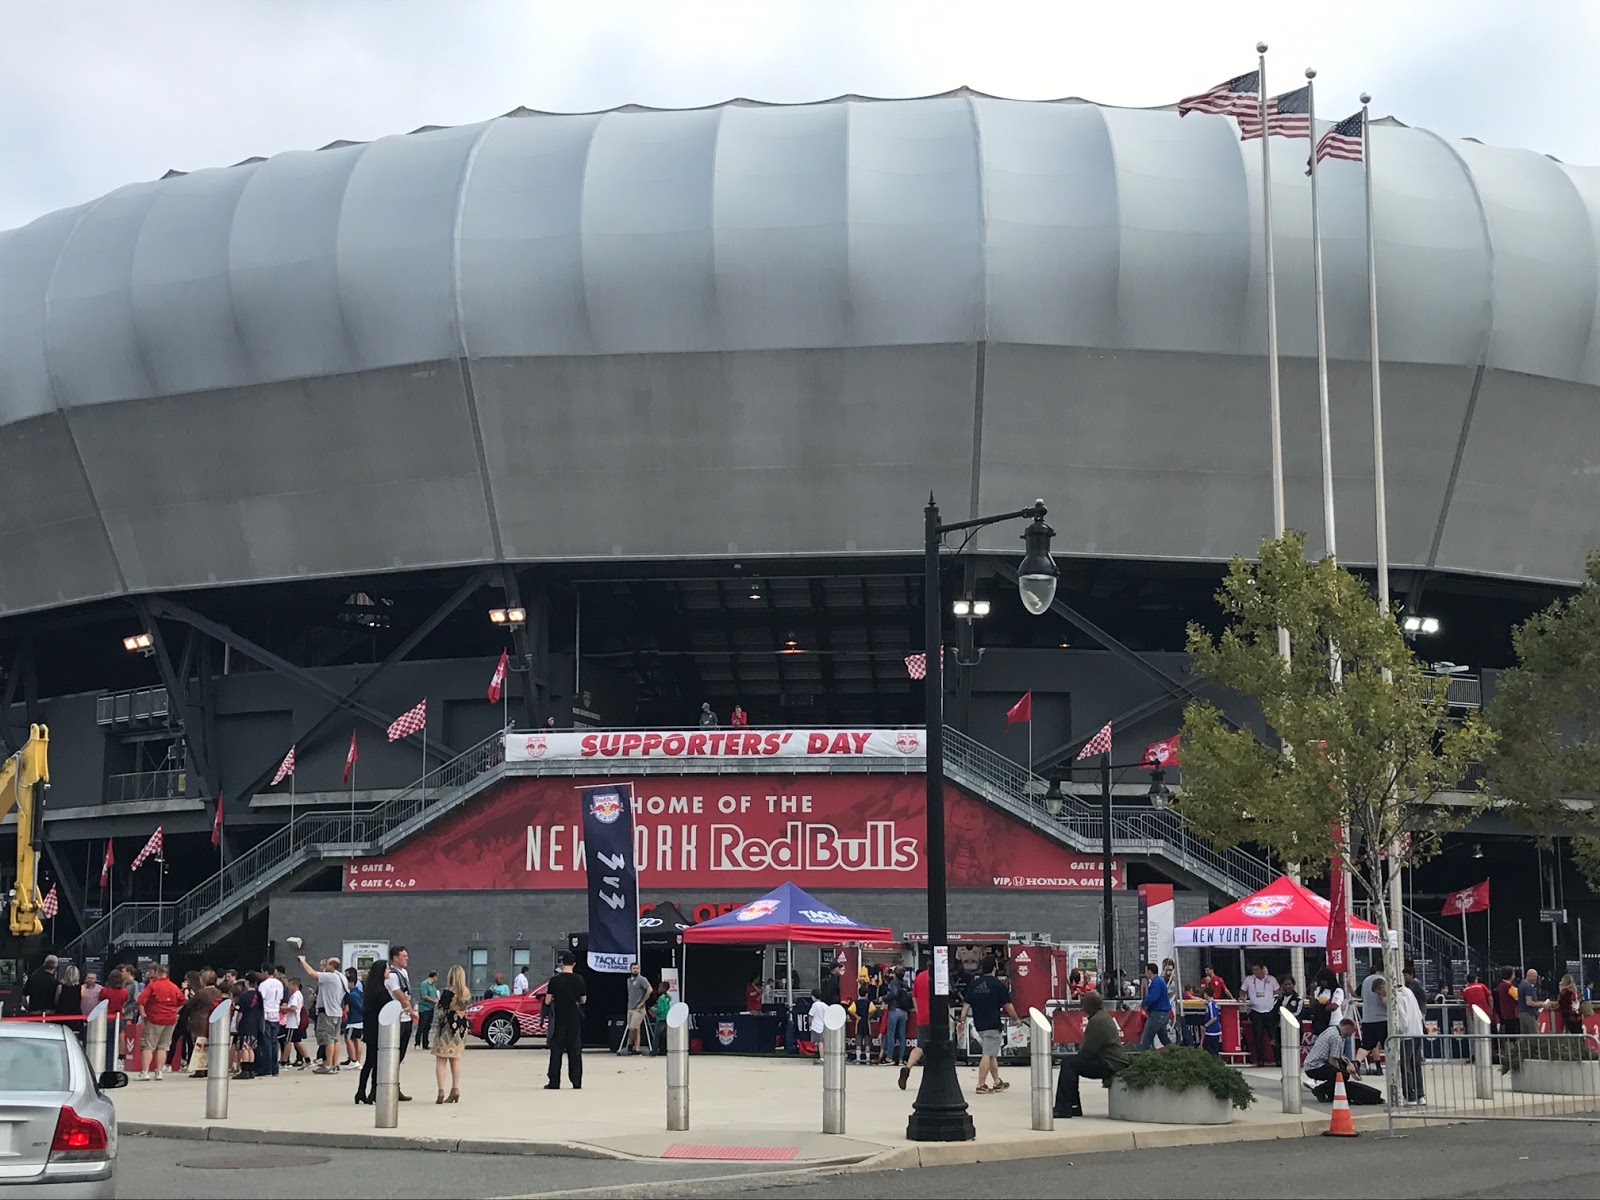 Red Bull Arena to Host Doubleheader of International Matches in